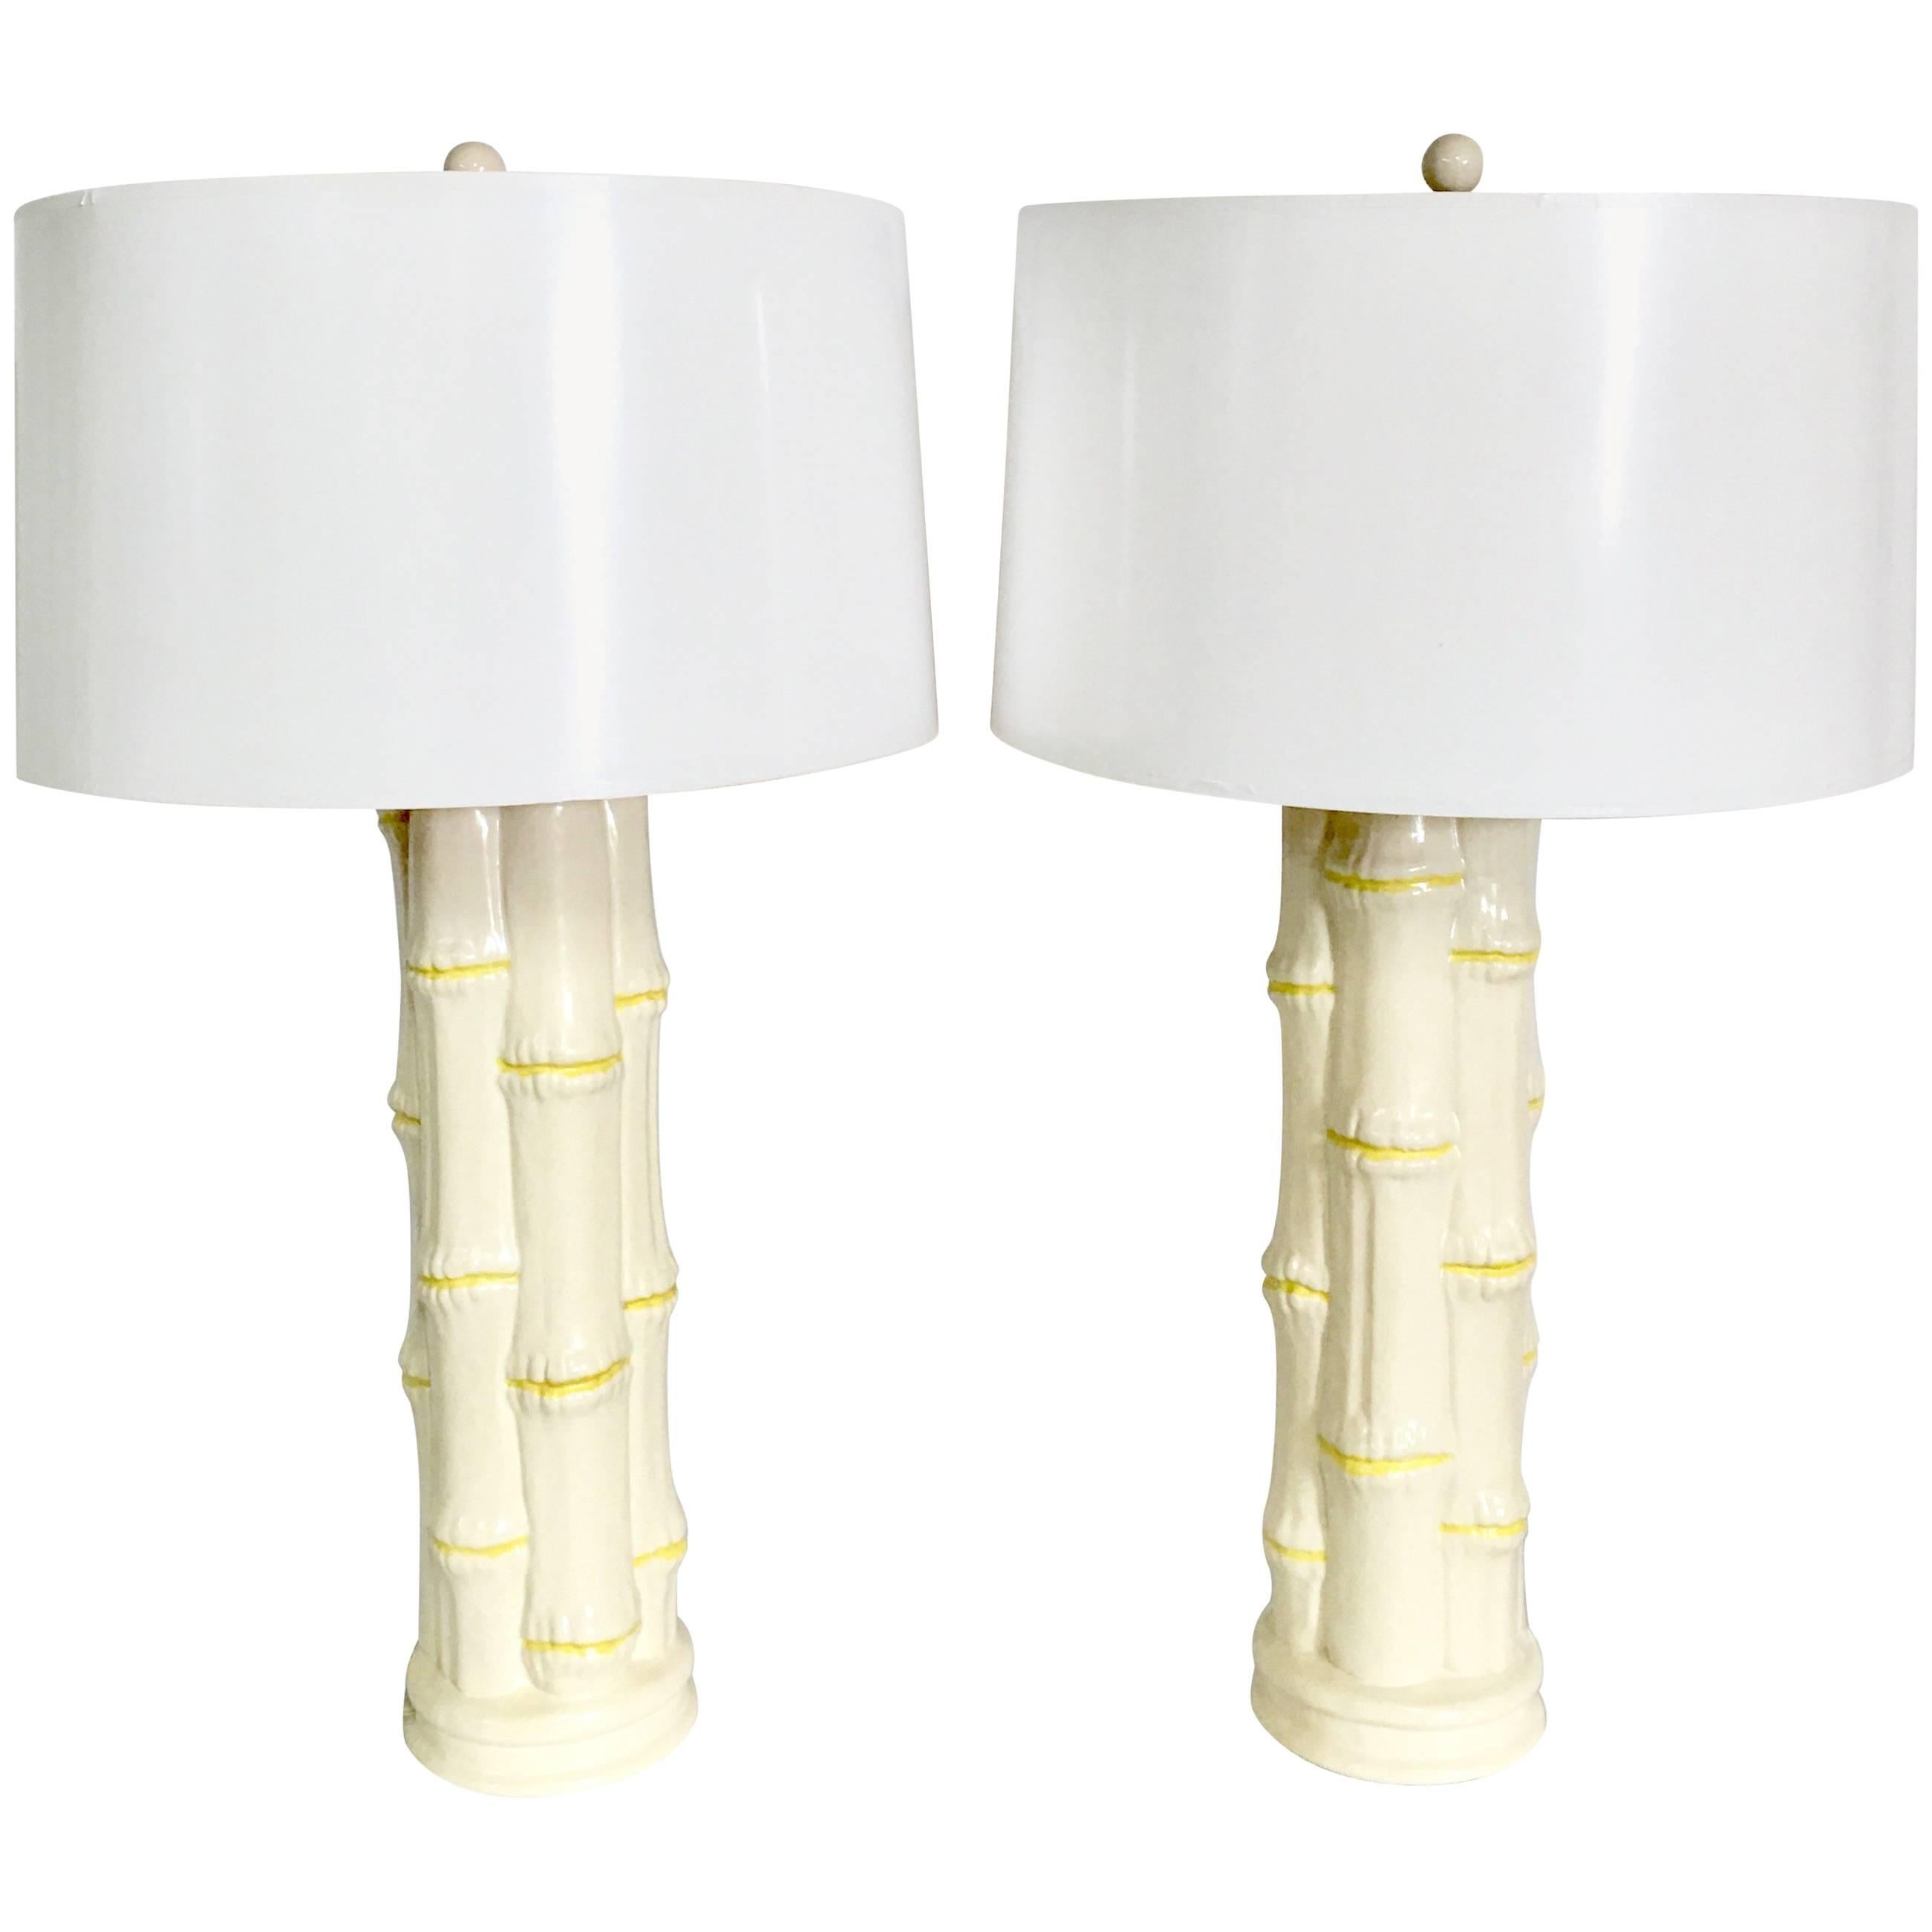 1960s pair of Hollywood Regency tall ceramic glaze dimensional white and yellow faux bamboo table lamps. Features original brass fittings. Includes pair of white ceramic round finial and gold brass harps. Wired for the US and in working order. Takes